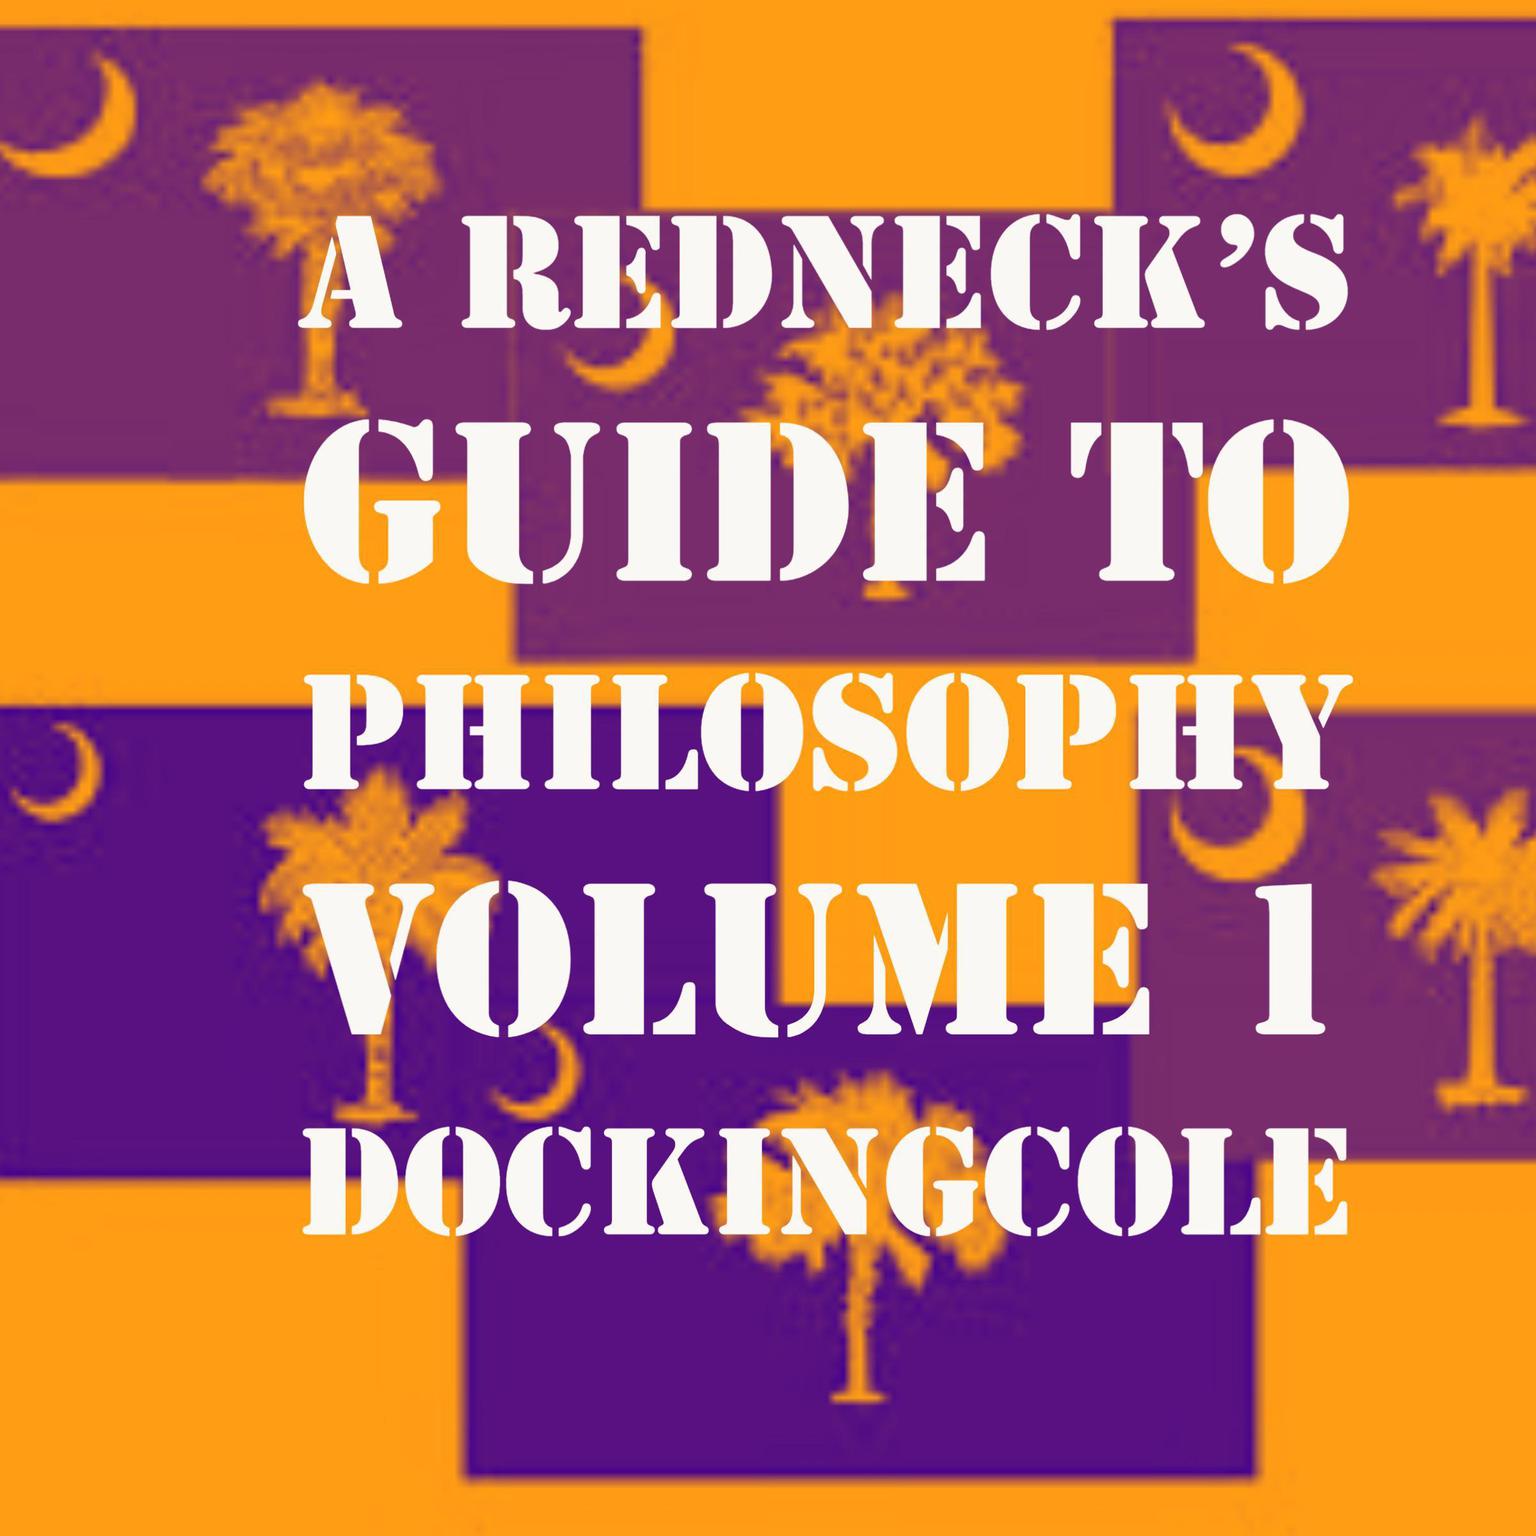 A RedNecks Guide to Philosophy Volume 1 Audiobook, by Doc King Cole